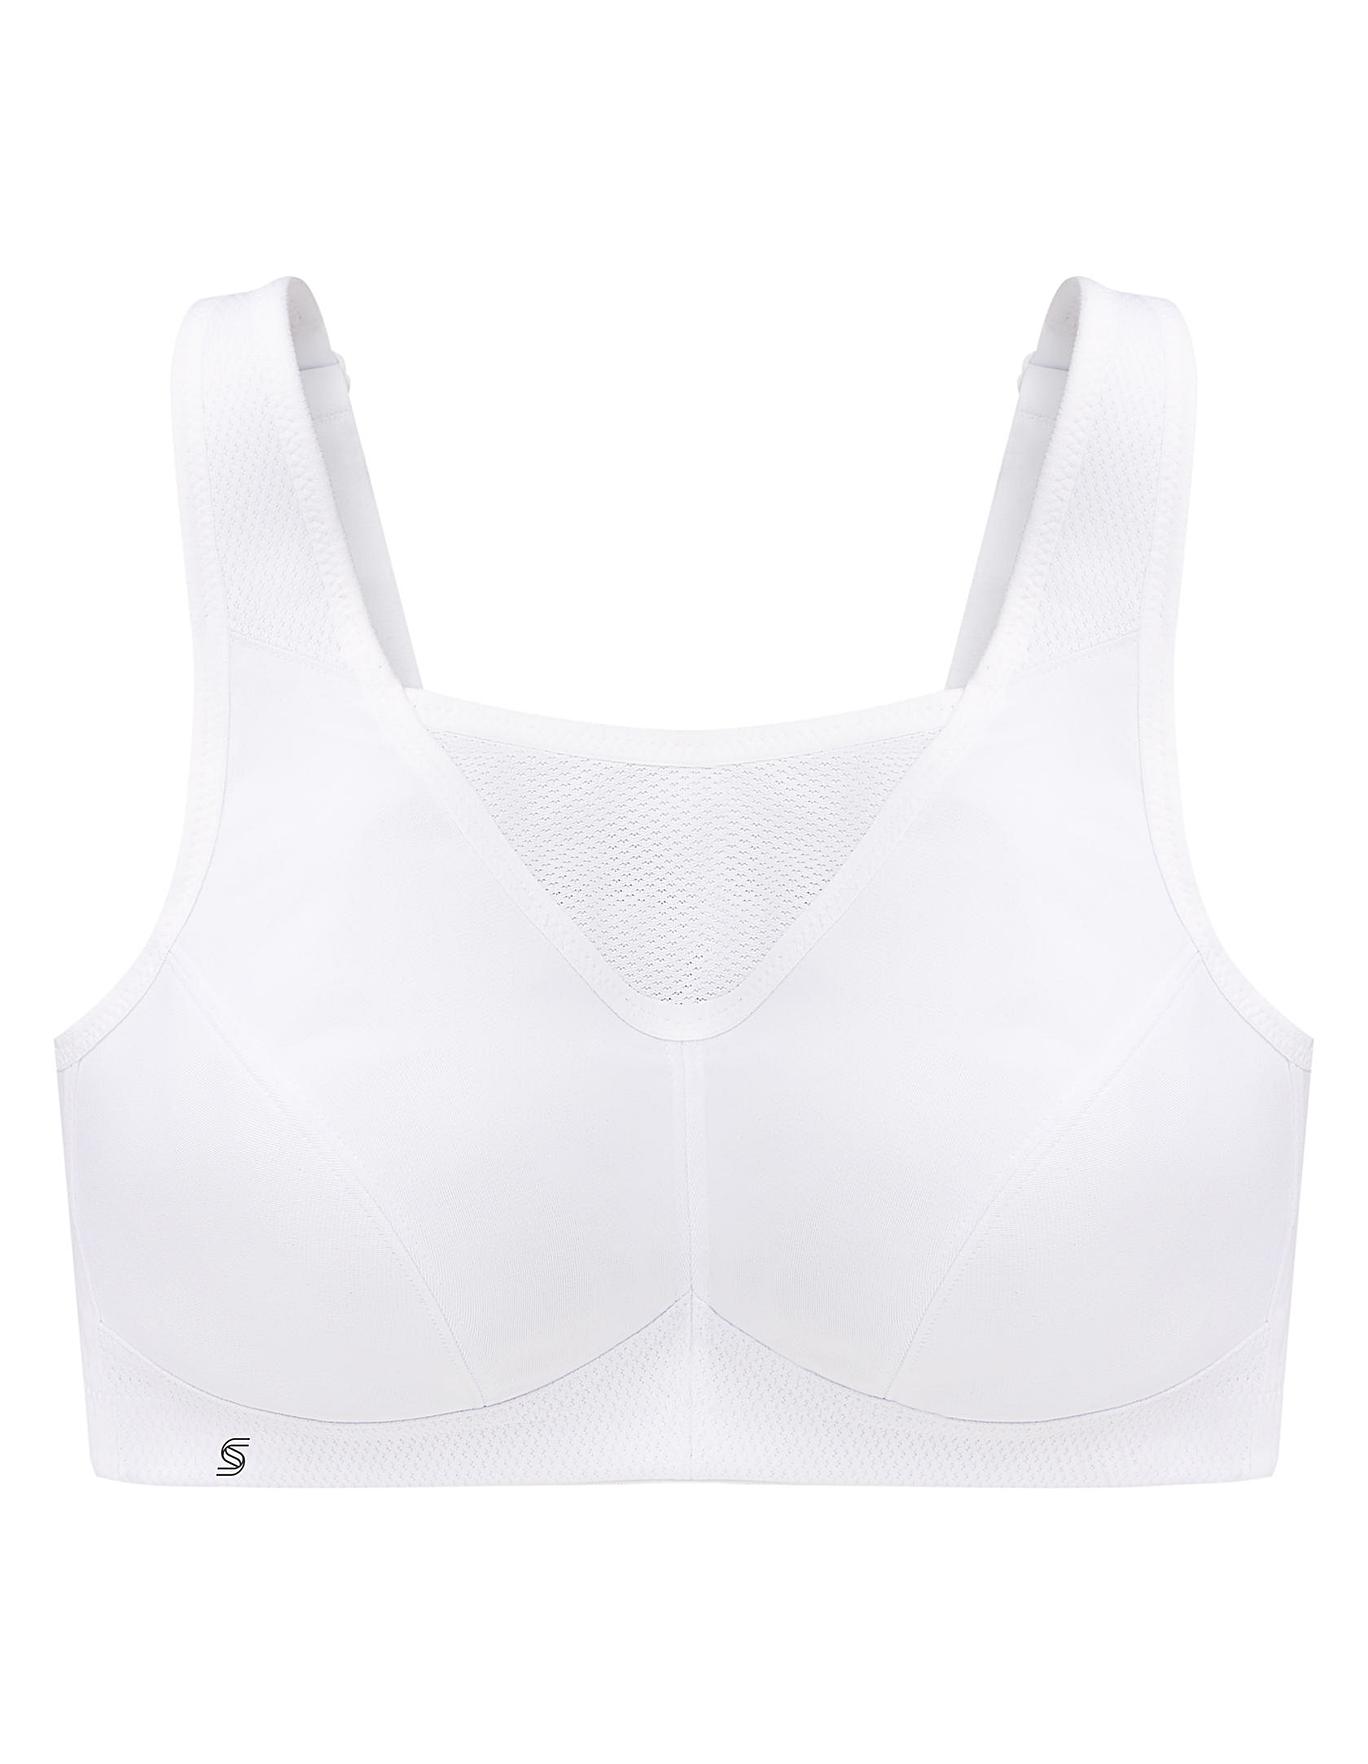 Glamorise Sports Bra Archives - Beauty News NYC - The First Online